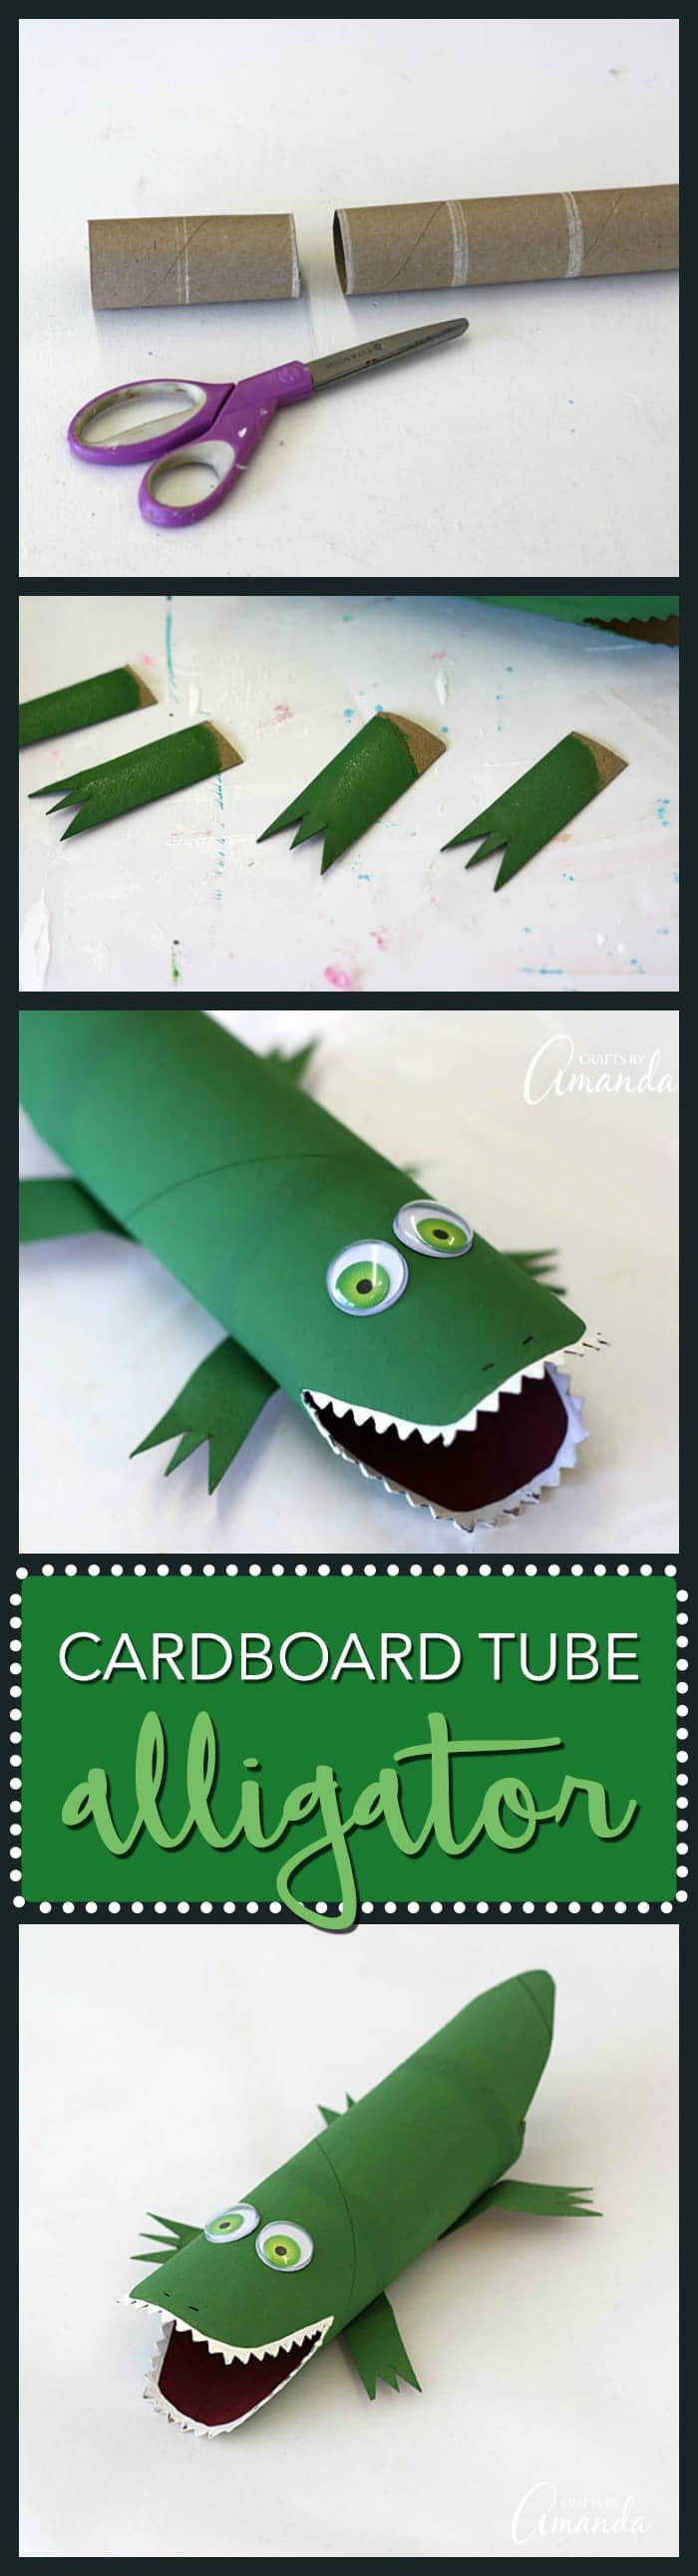 Cardboard Tube Alligator: make this cute alligator from a paper towel roll - Cardboard roll crafts are tons of fun and this cardboard tube alligator is no exception. This cute alligator craft will be lots of fun for the kids!